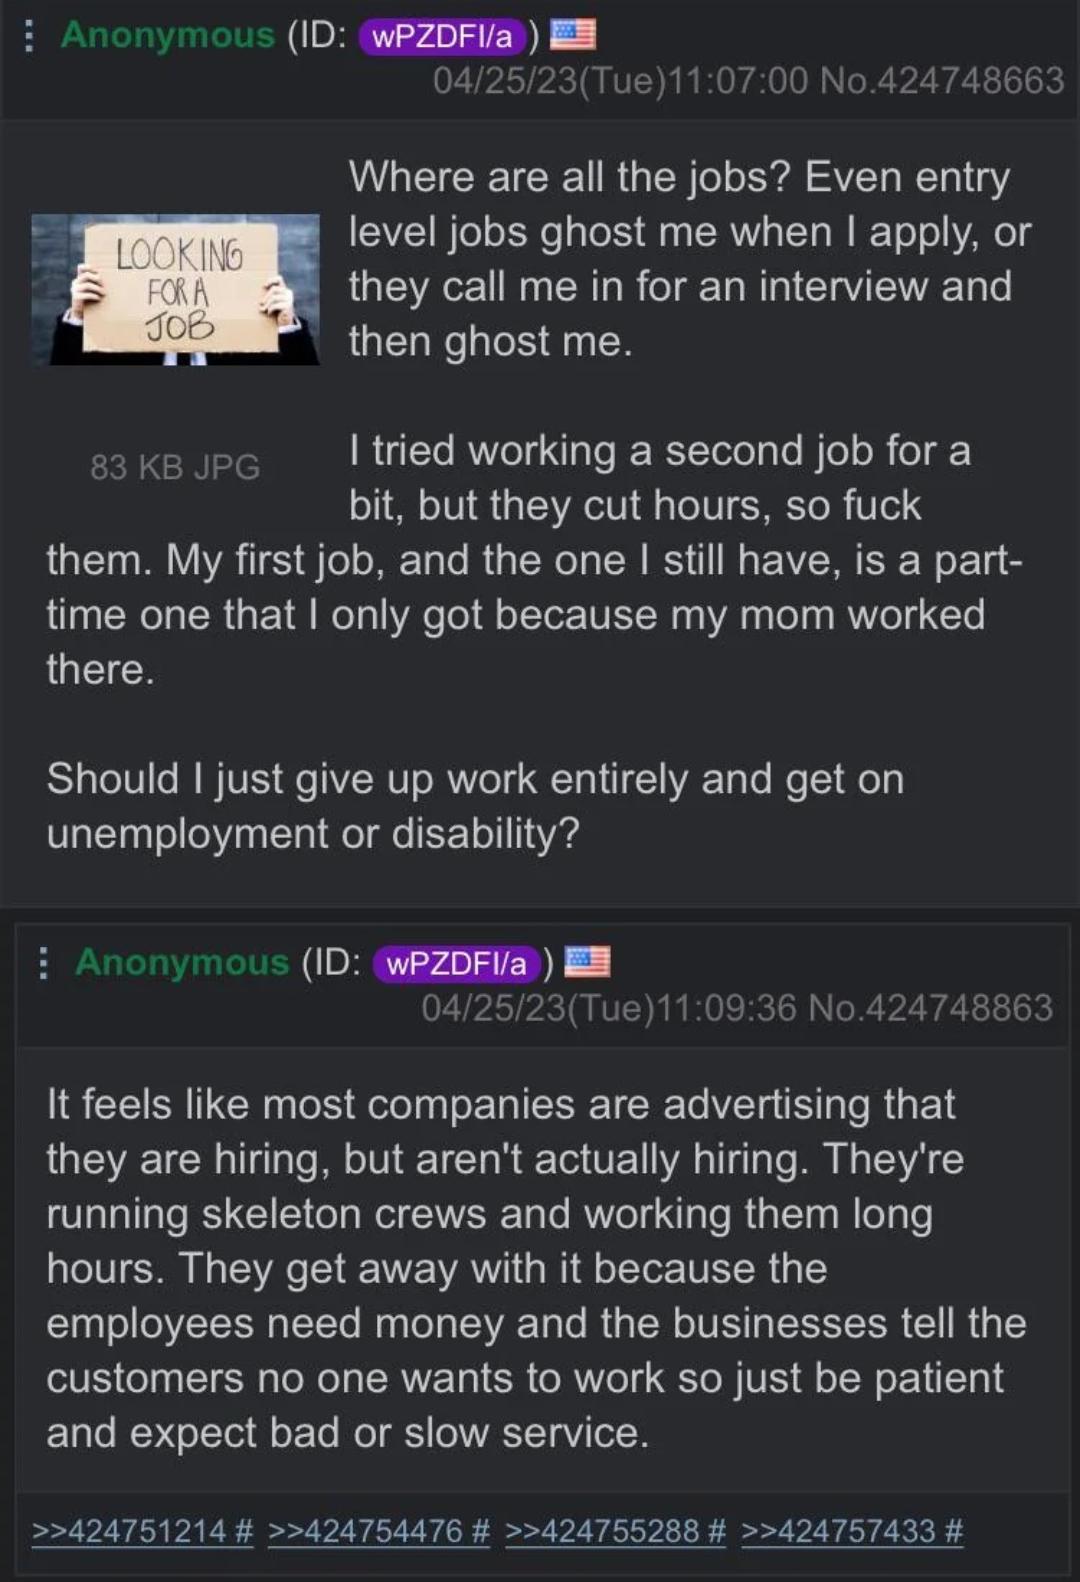 anitwork memes - screenshot - Anonymous Id wPZDFIa Looking For A Job 042523Tue00 No.424748663 Where are all the jobs? Even entry level jobs ghost me when I apply, or they call me in for an interview and then ghost me. I tried working a second job for a bi